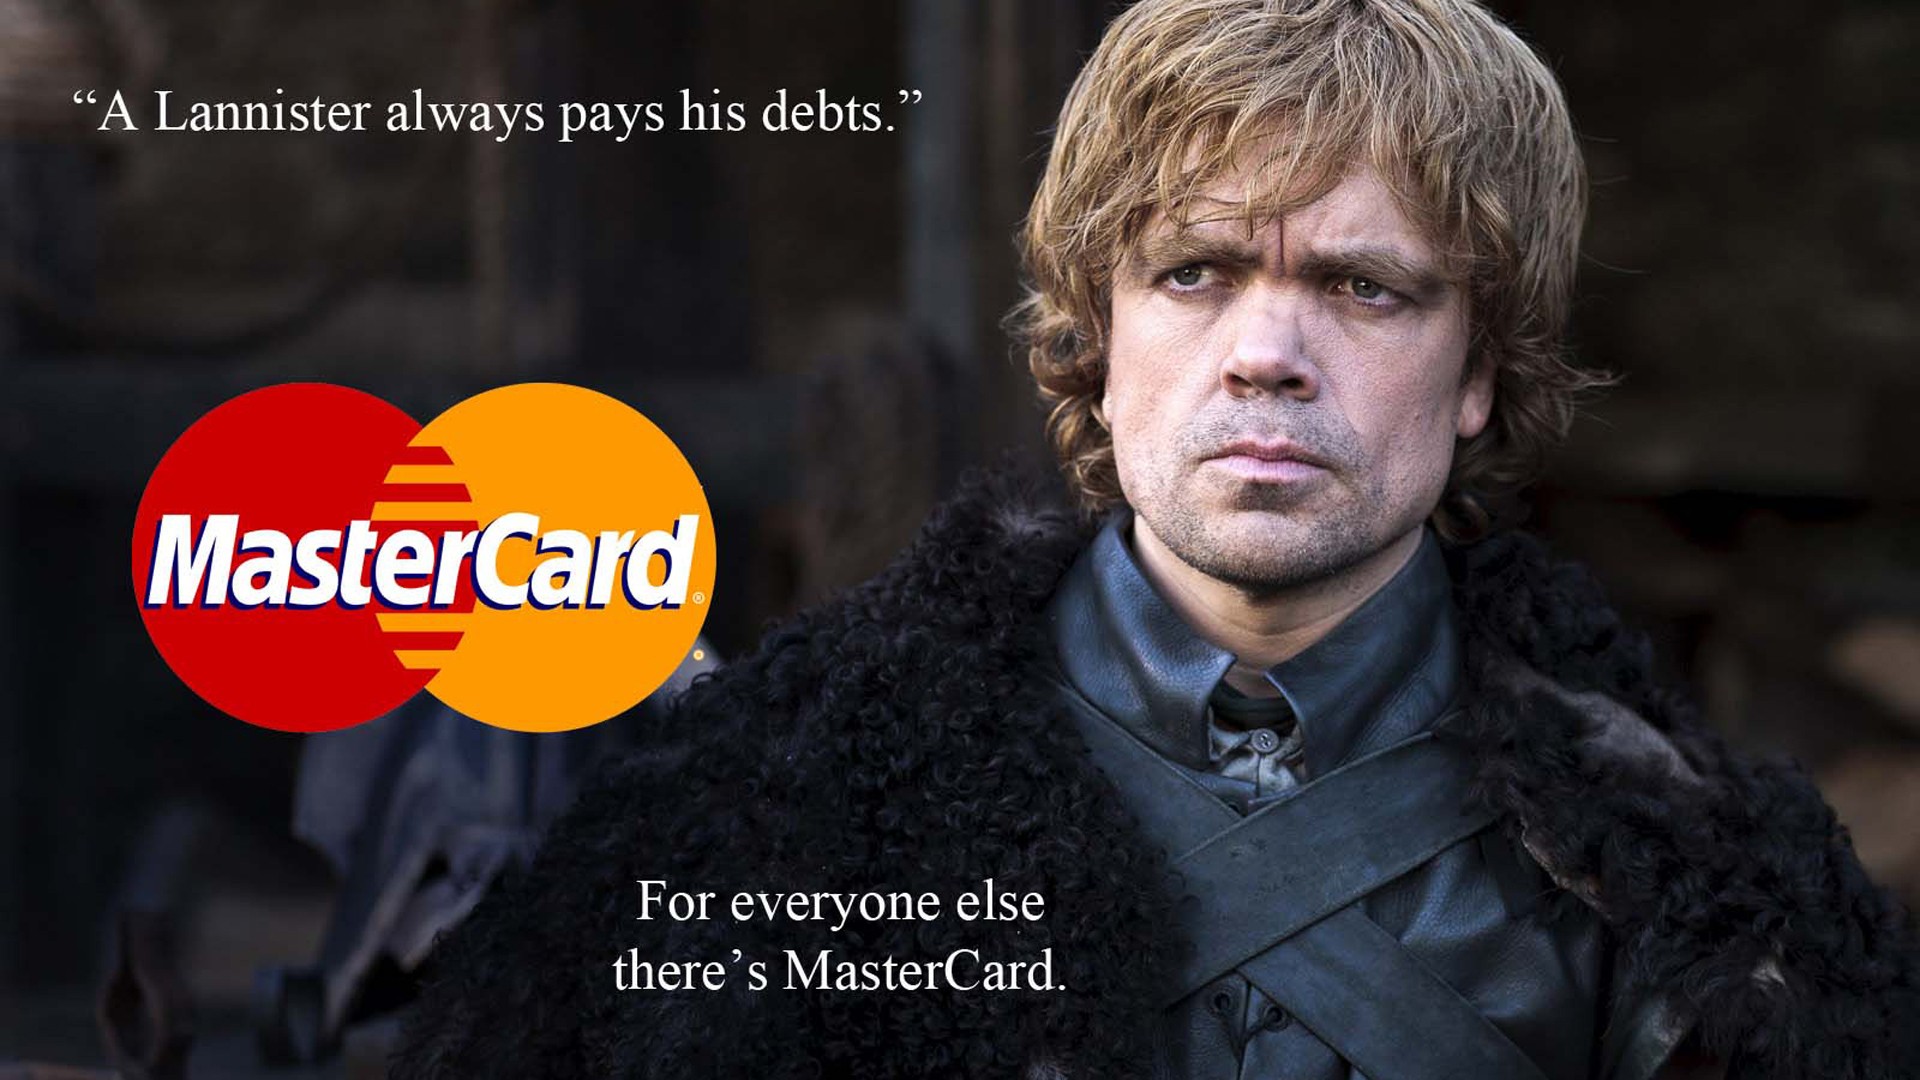 Game Of Thrones, Humor, Tyrion Lannister, Peter Dinklage Wallpaper